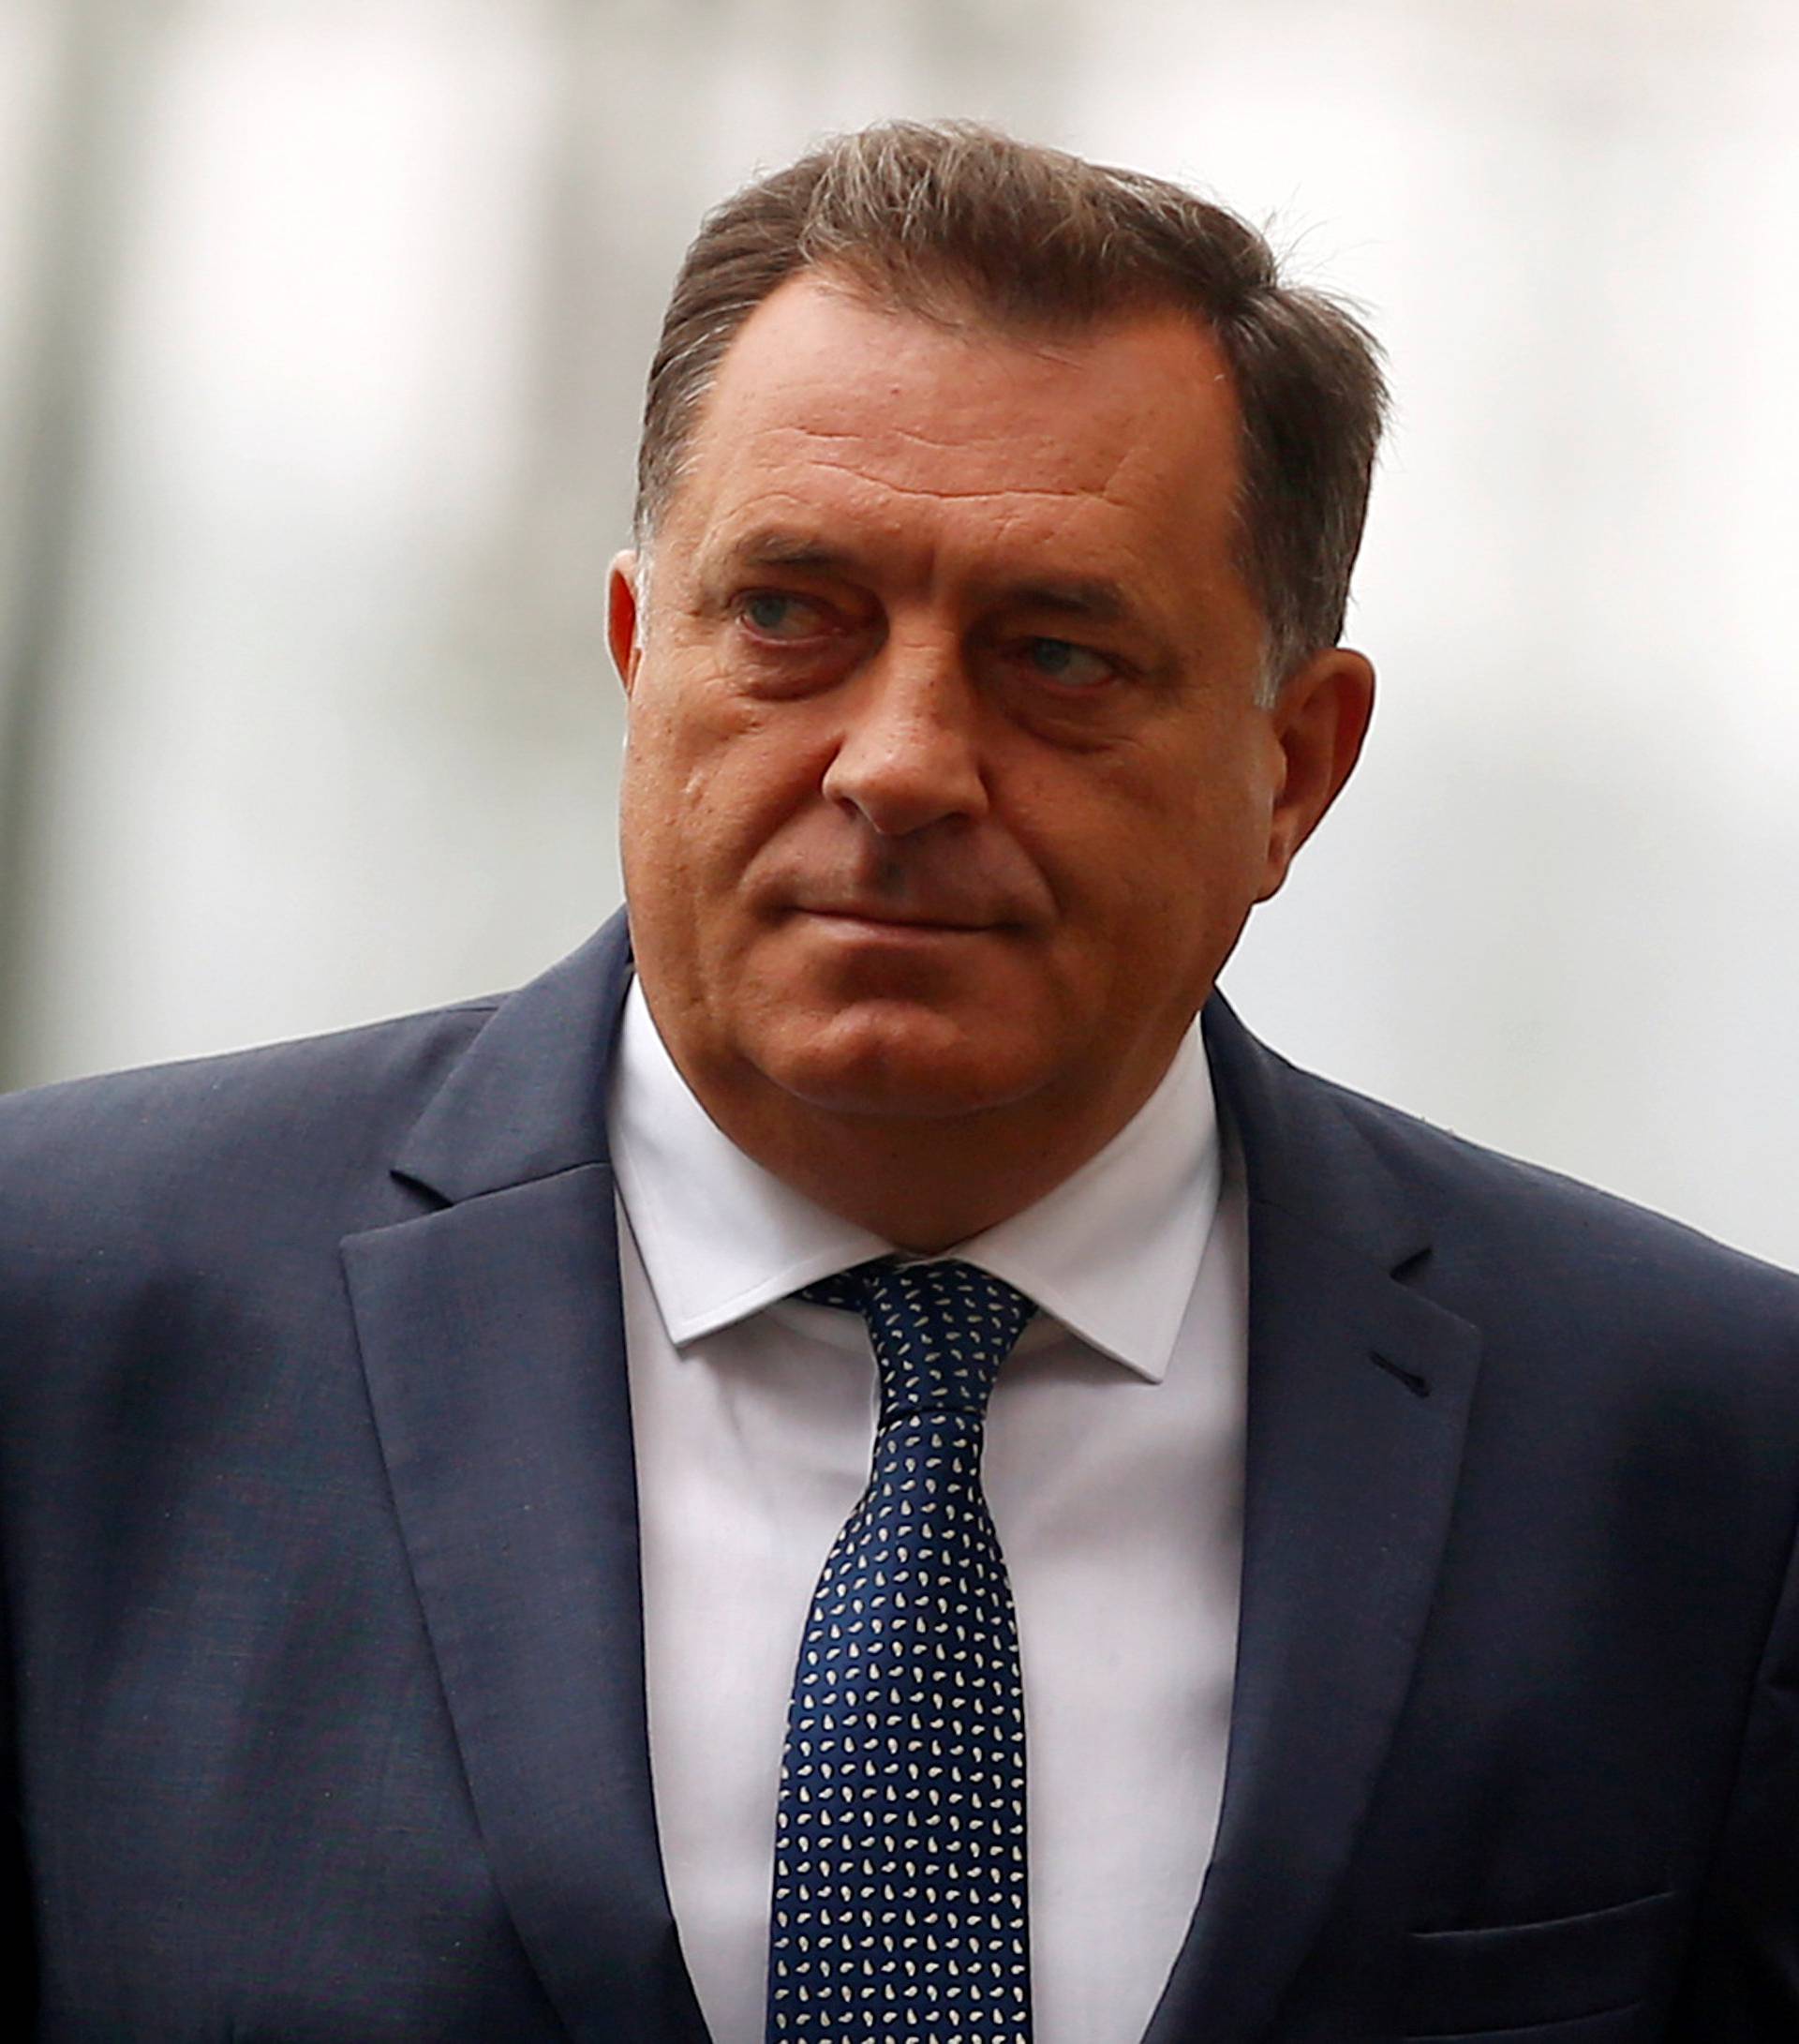 President of the Republika Srpska, Milorad Dodik, arrives to the ceremony marking the official commissioning of 300 MW coal-fired power plant in Stanari near Doboj